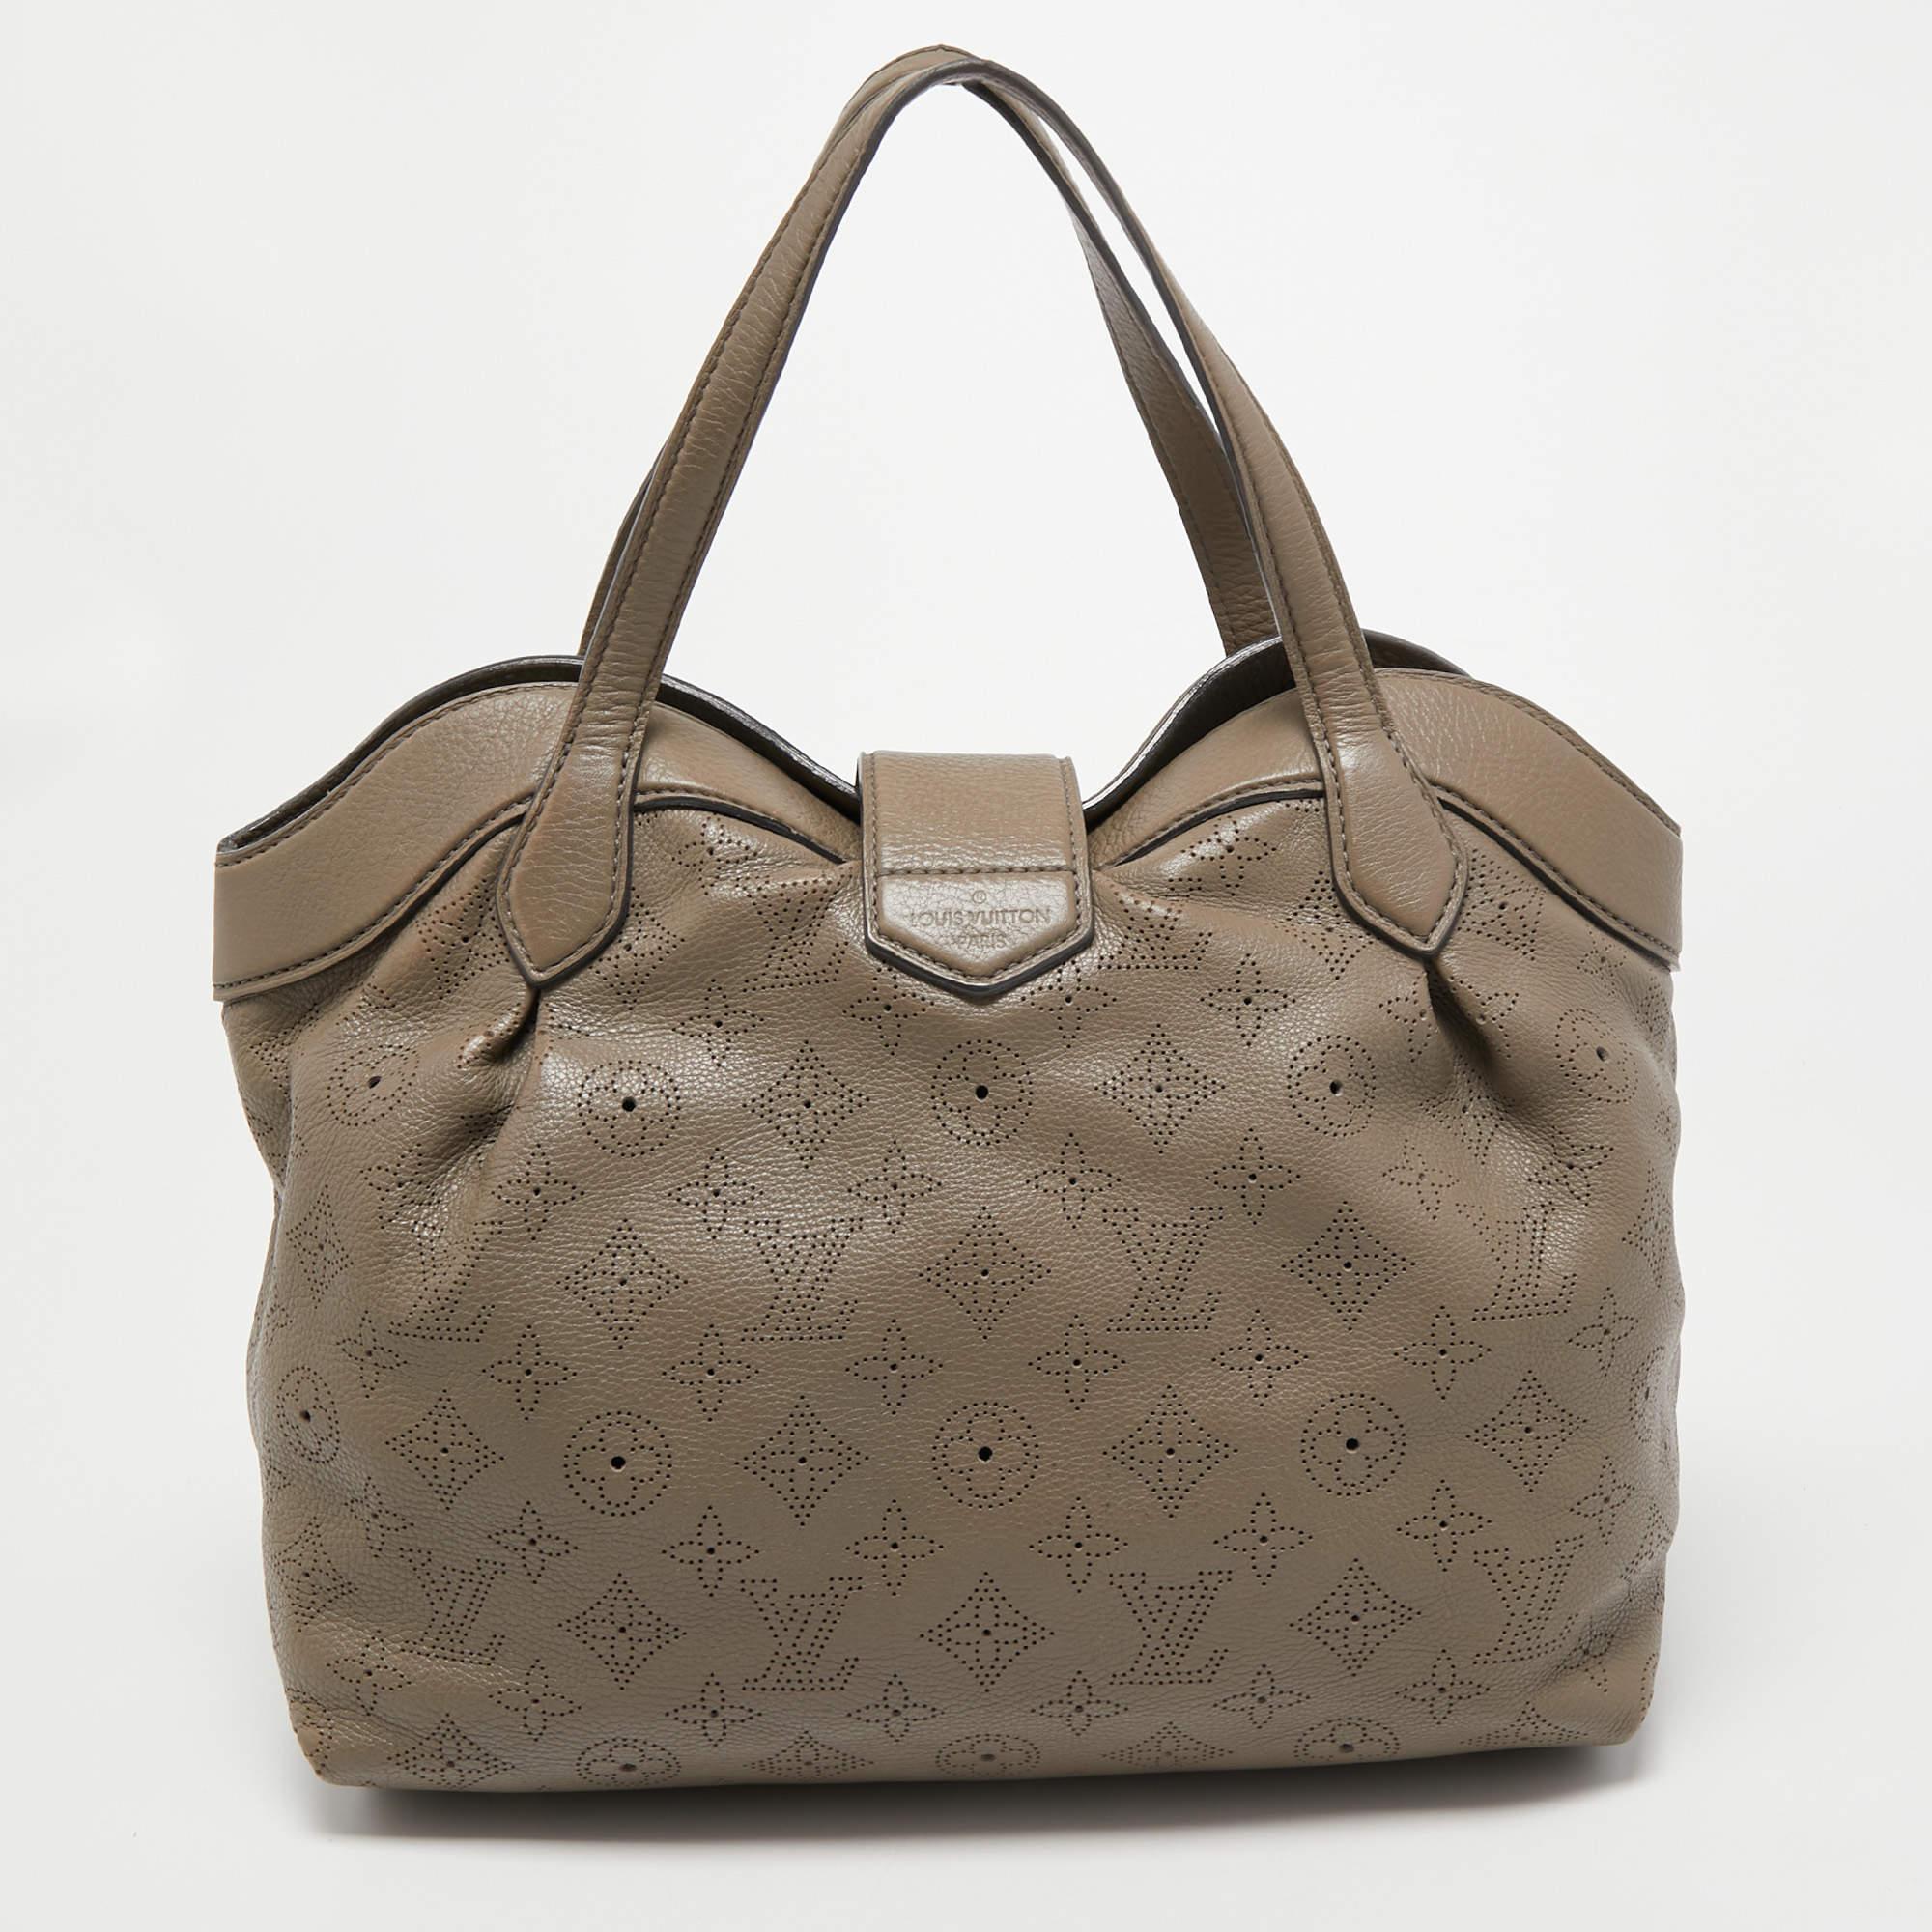 Ensure your day's essentials are in order and your outfit is complete with this LV women's bag. Crafted using the best materials, the bag carries the maison's signature of artful craftsmanship and enduring appeal.

